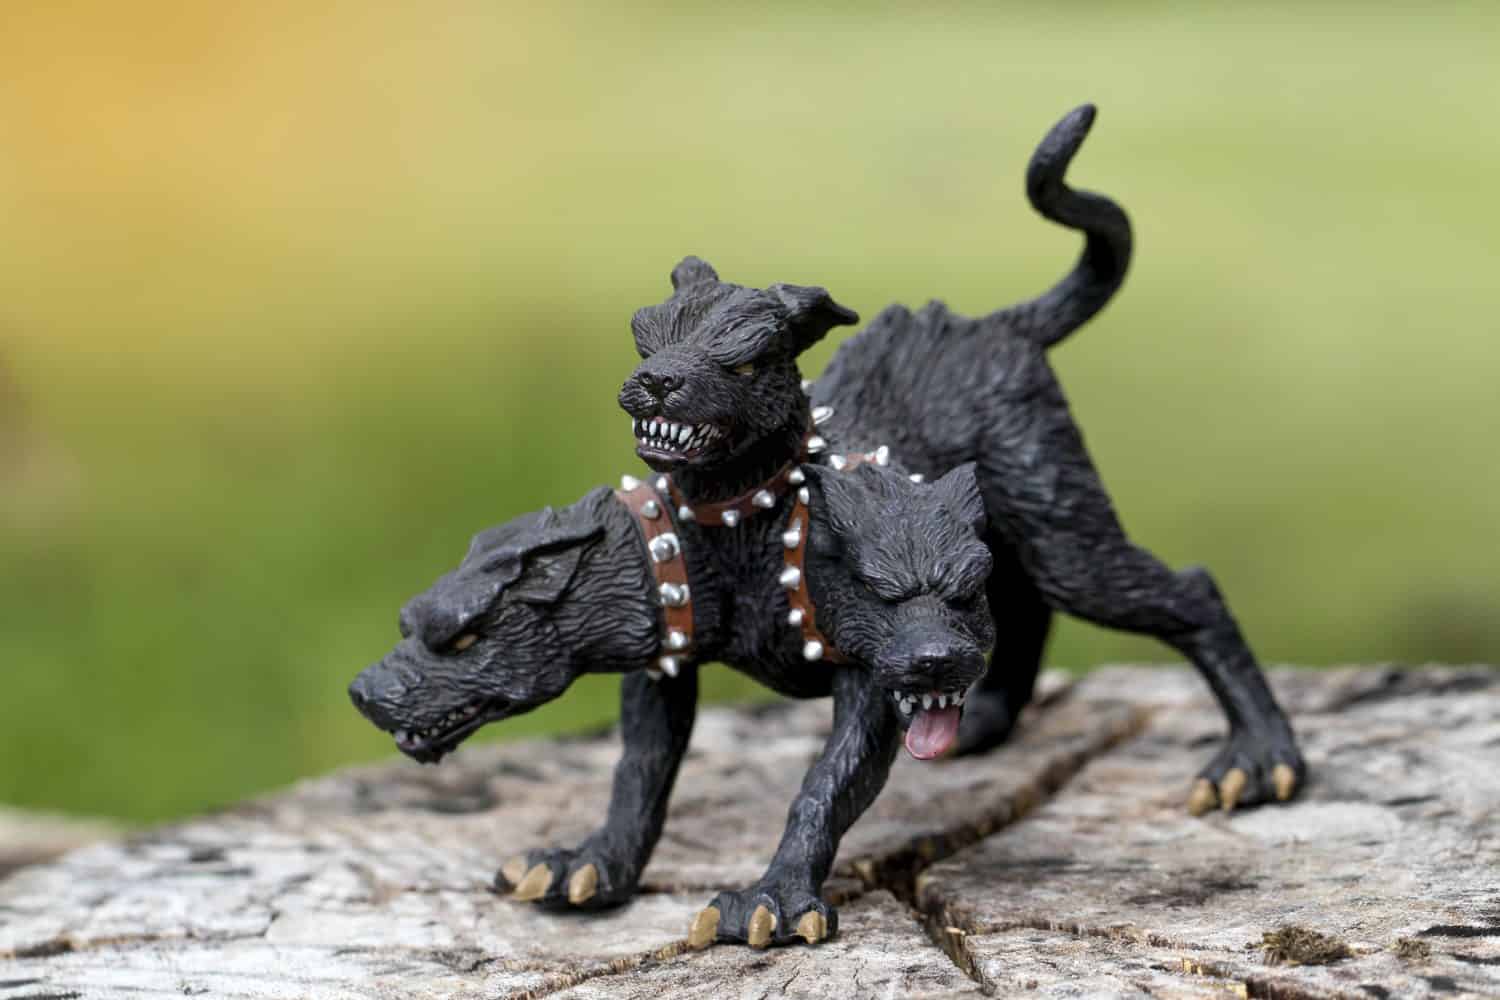 Cerberus, In Greek mythology, Cerberus , is the Hound of Hades, the monstrous multi-headed dog that guards the gates of the Underworld to prevent the dead from leaving.